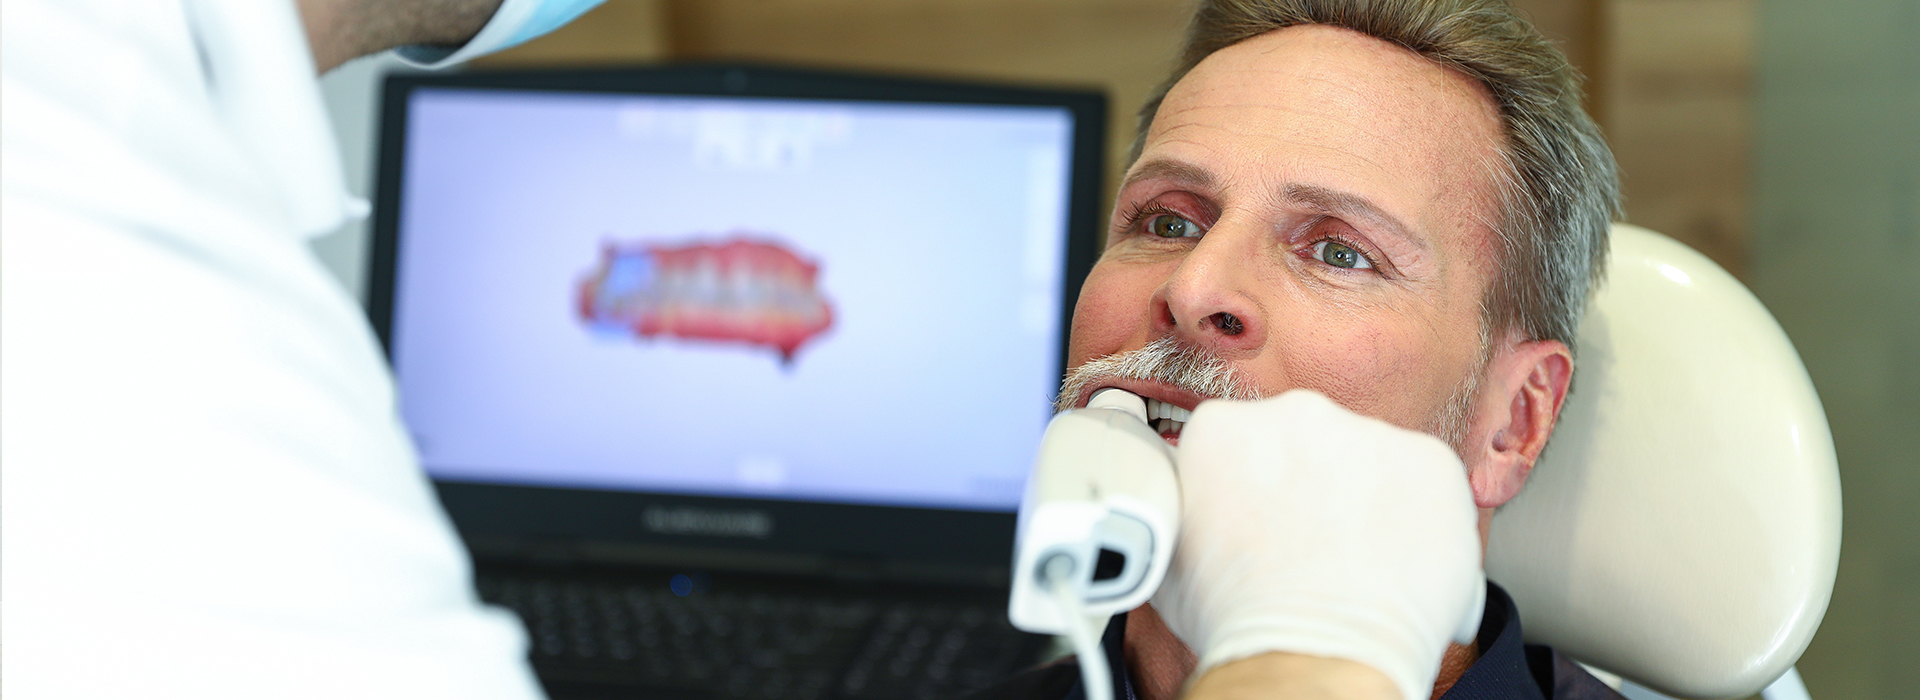 Man receiving dental care in a professional setting, with a dentist performing a procedure.